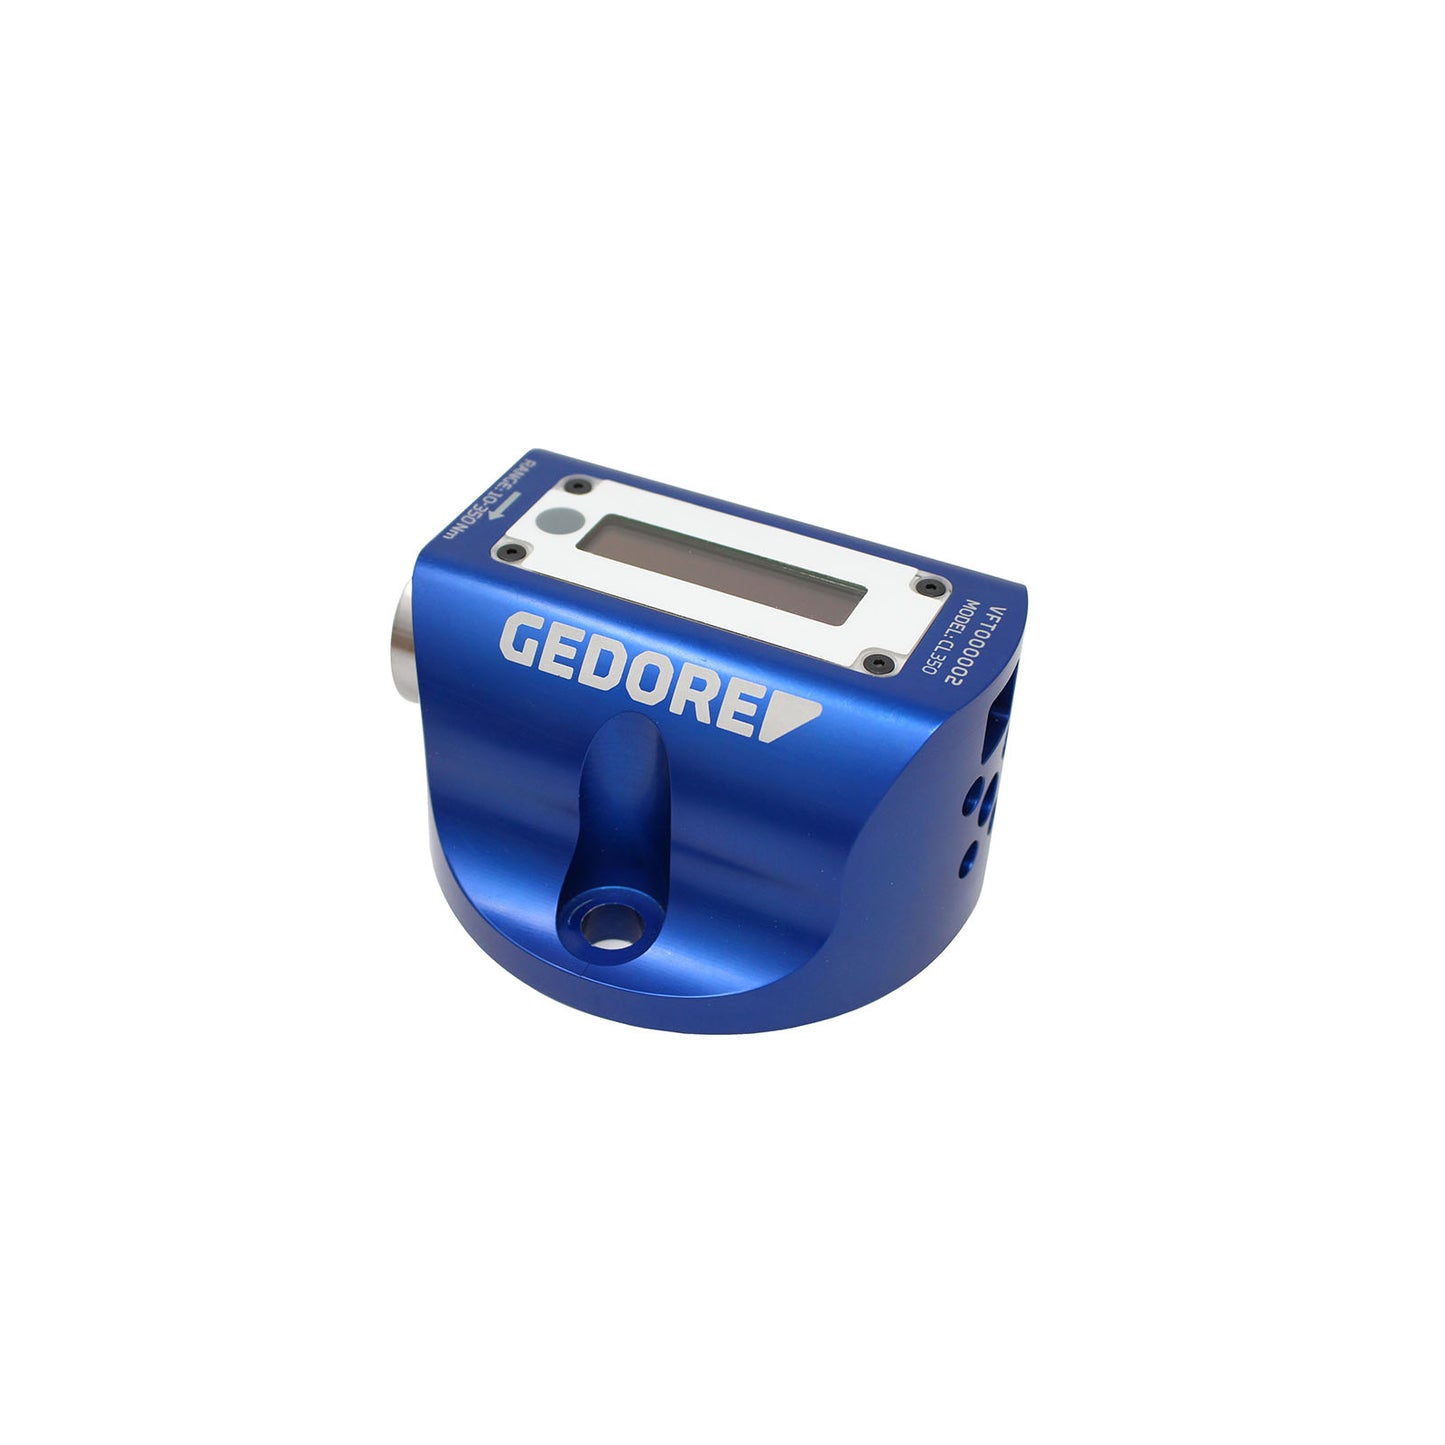 GEDORE CL 1 - Capture Lite dynamometric tester 0.02 -1 Nm (3297888)